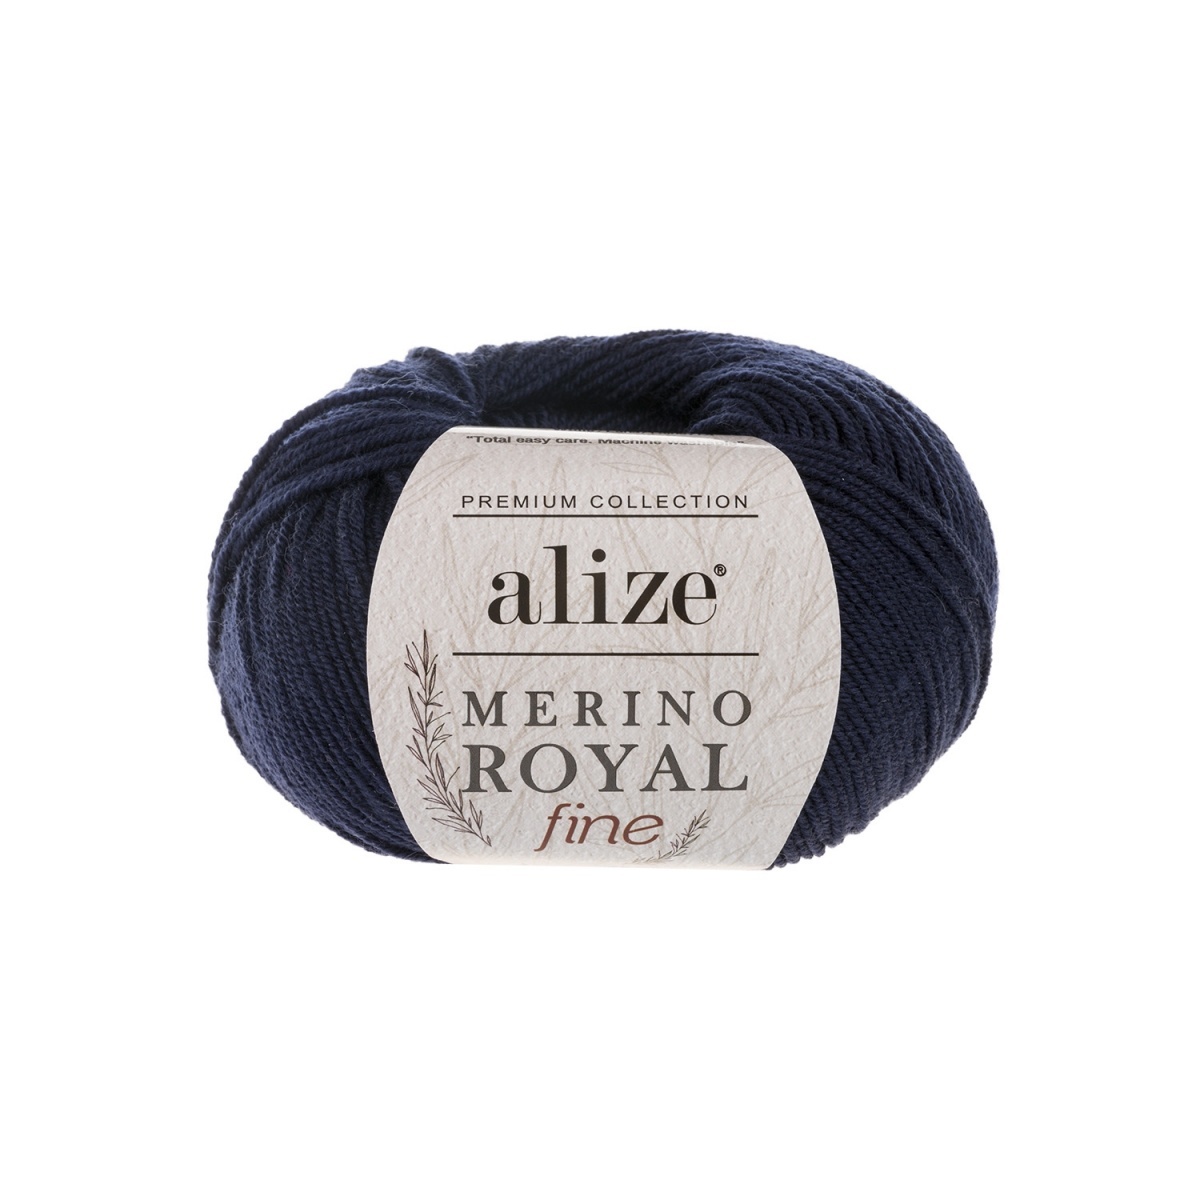 Alize Merino Royal Fine, 100% Wool, 10 Skein Value Pack, 500g фото 1